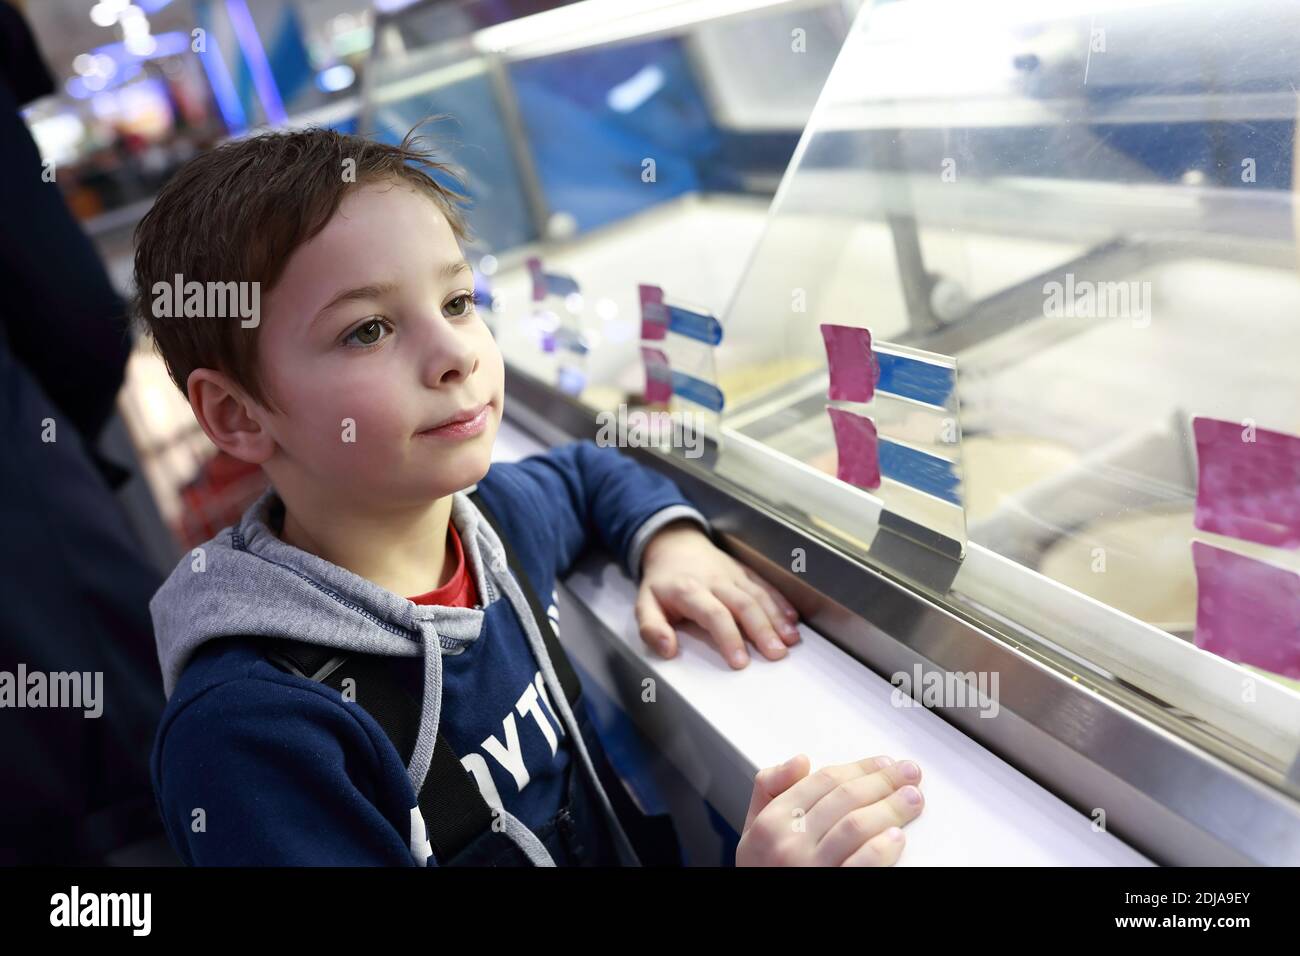 Child choosing ice cream in a cafe Stock Photo